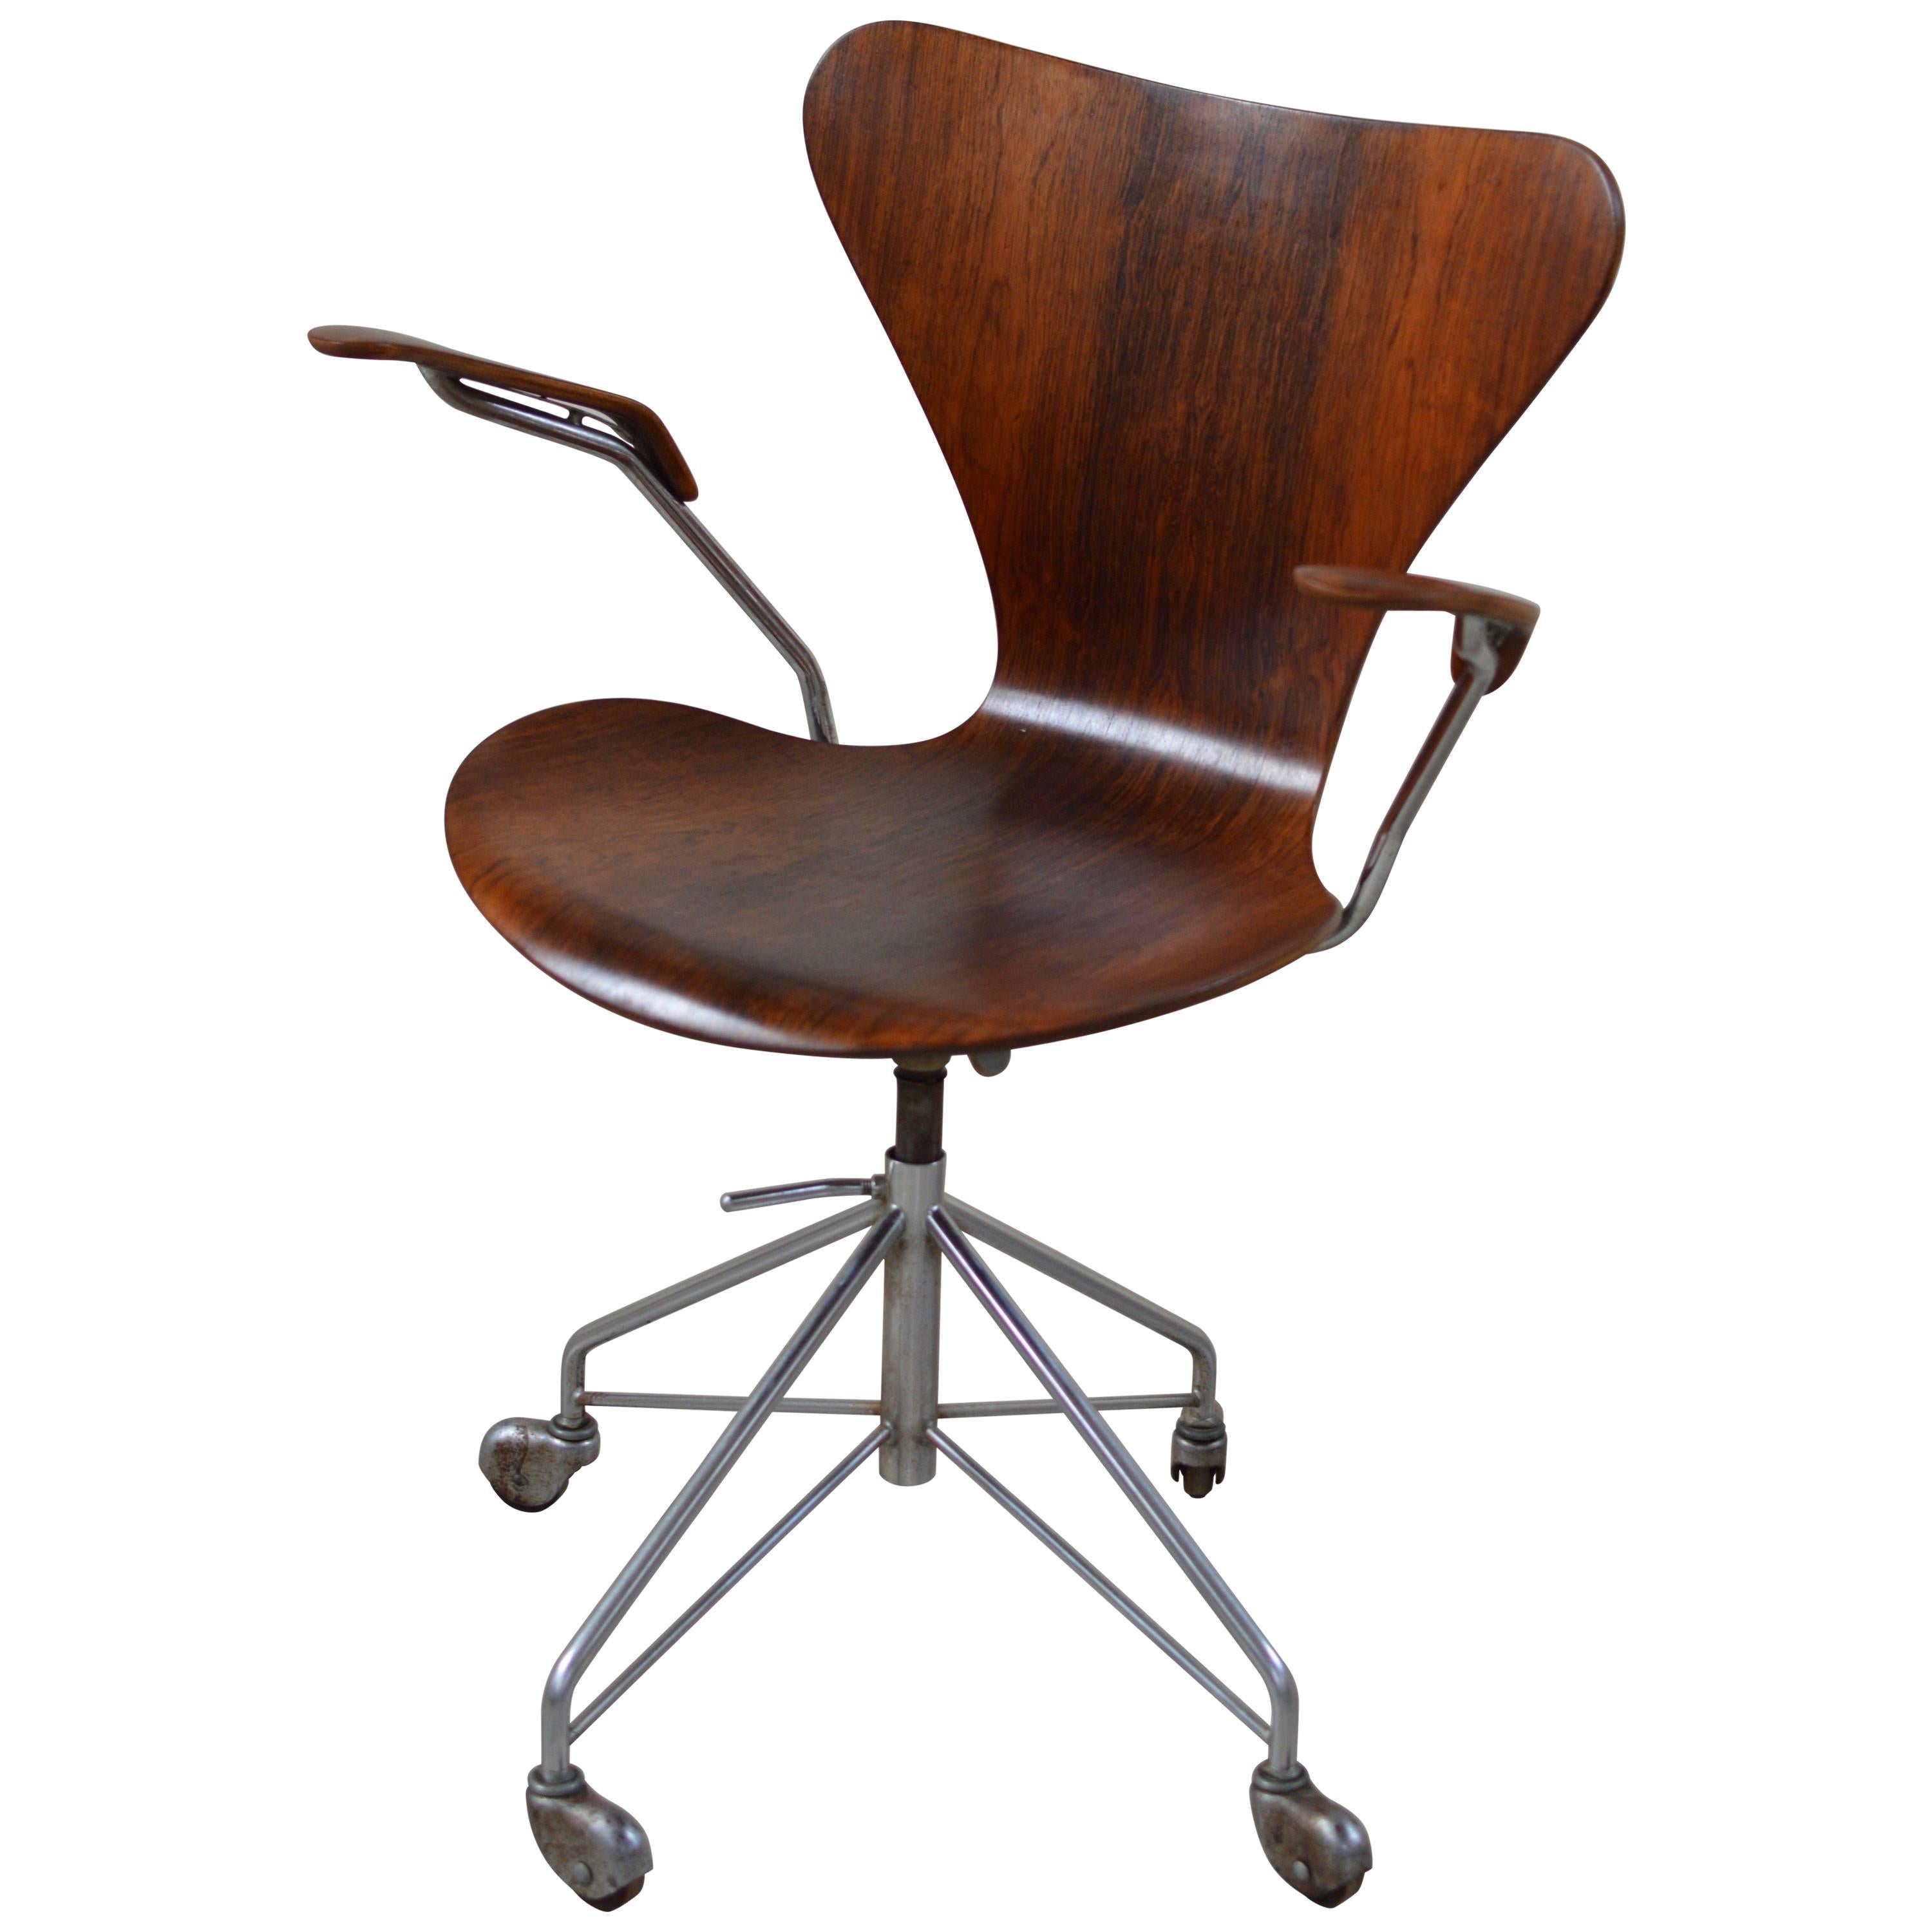 Rare First Production Series Rosewood Arne Jacobsen Desk Chair